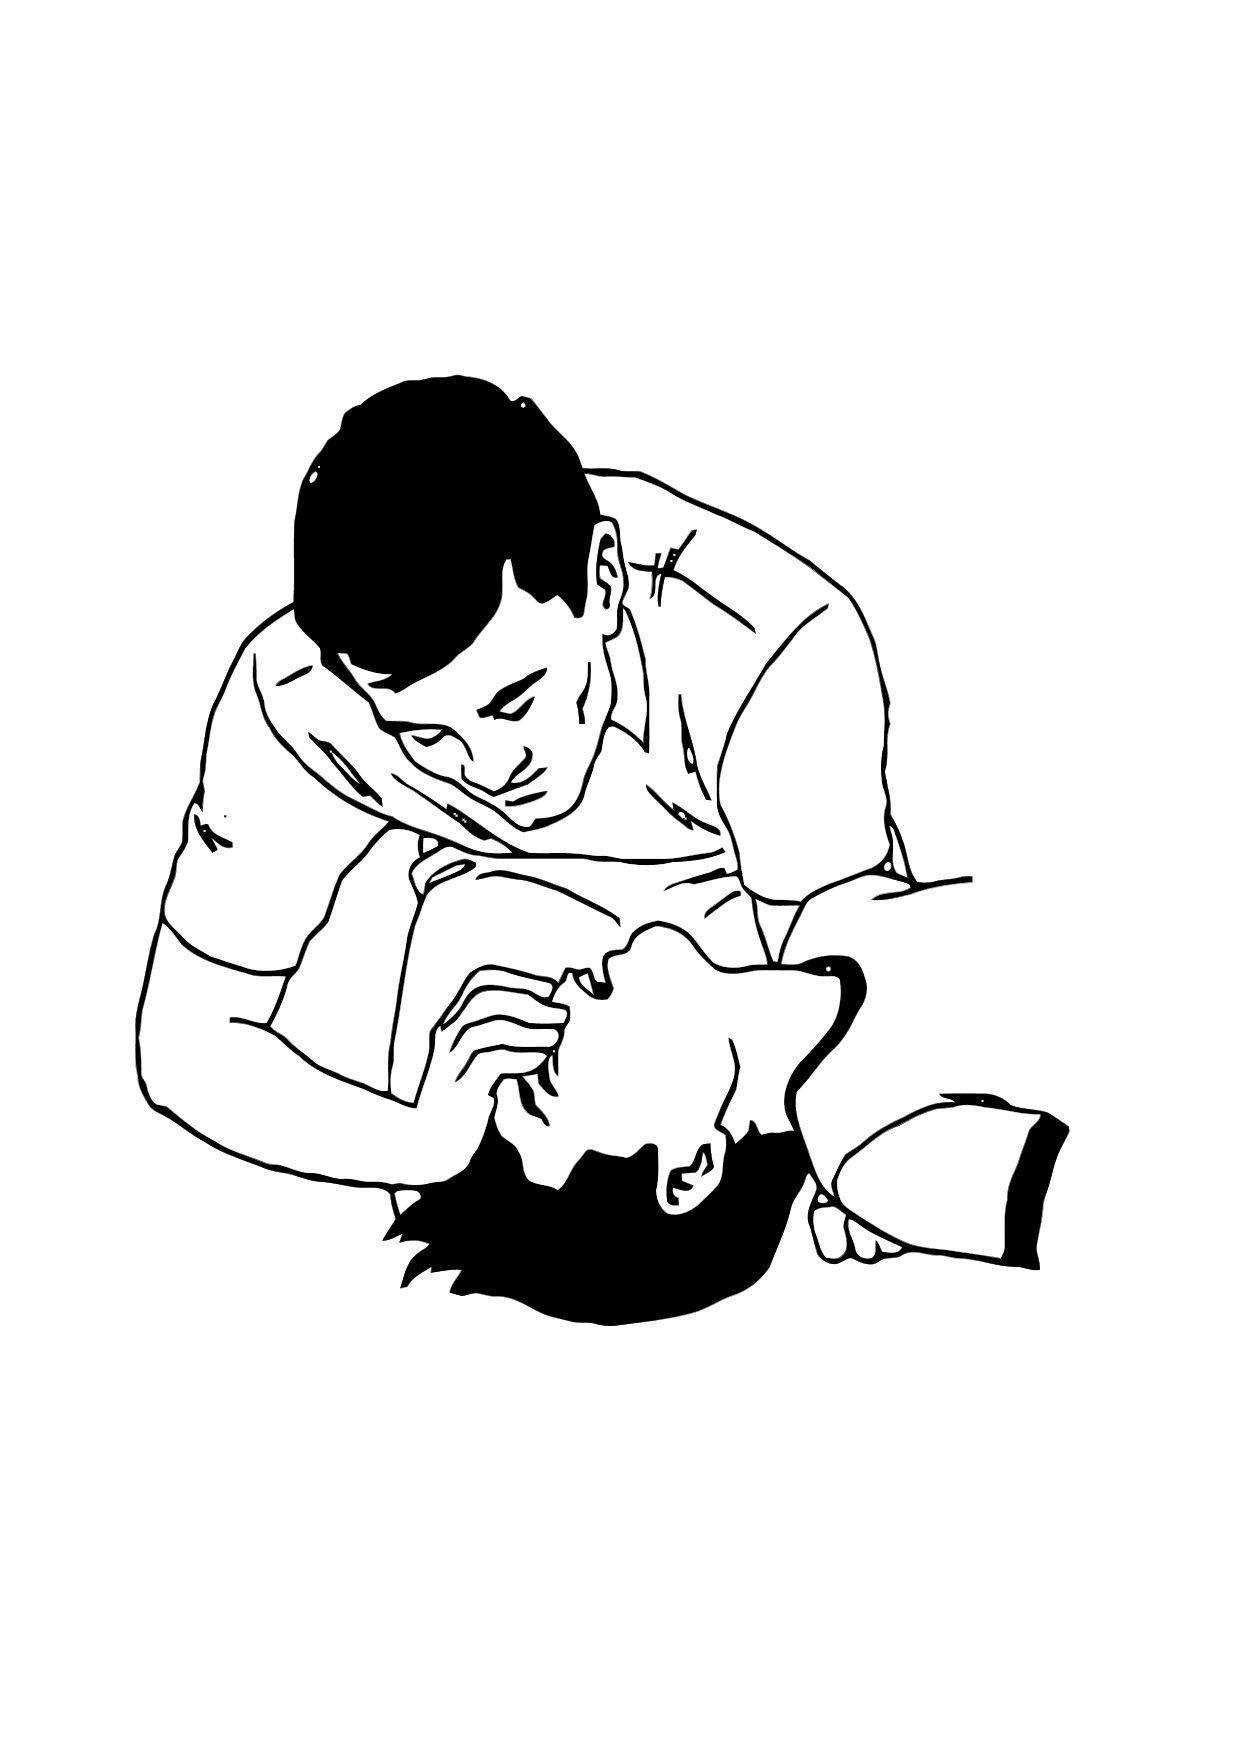 Coloring page mouth to mouth resuscitation